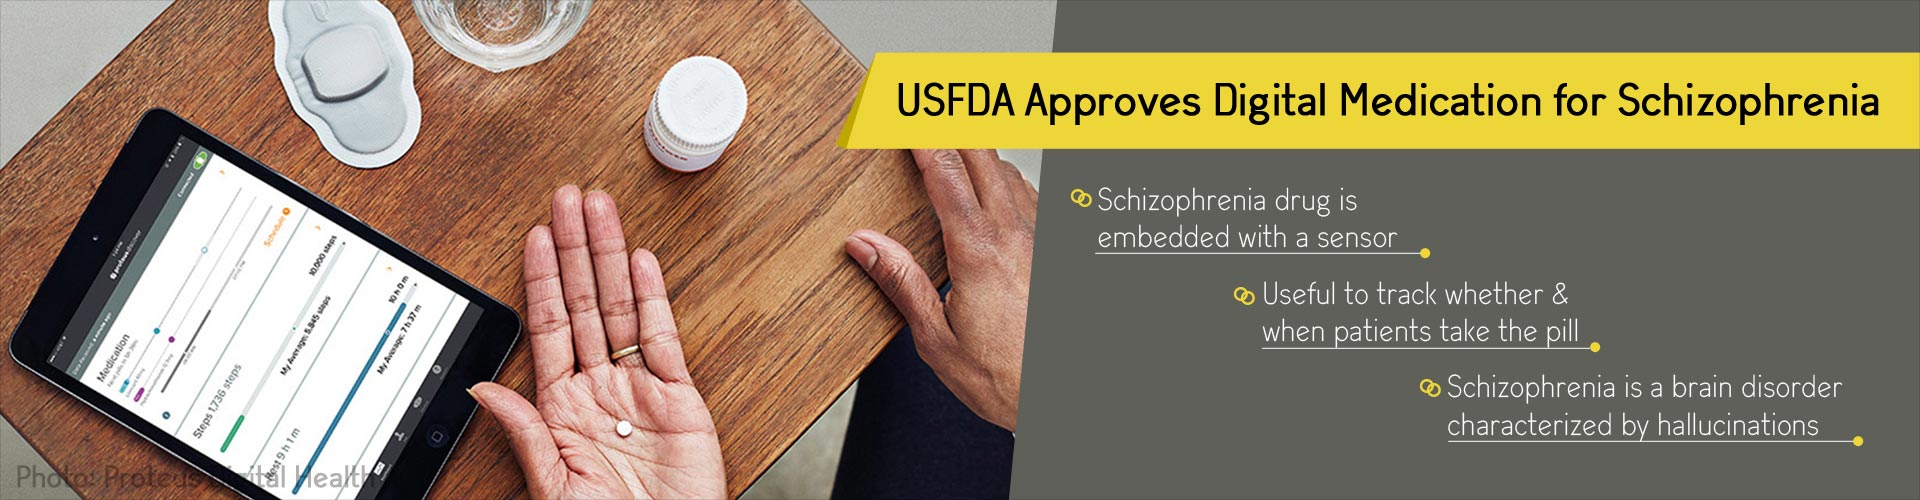 usfda approves digital medication for schizophrenia
- schizophrenia drug is embedded with a sensor
- useful to track whether & when patients take the pill
- schizophrenia is a brain disorder characterized by hallucinations